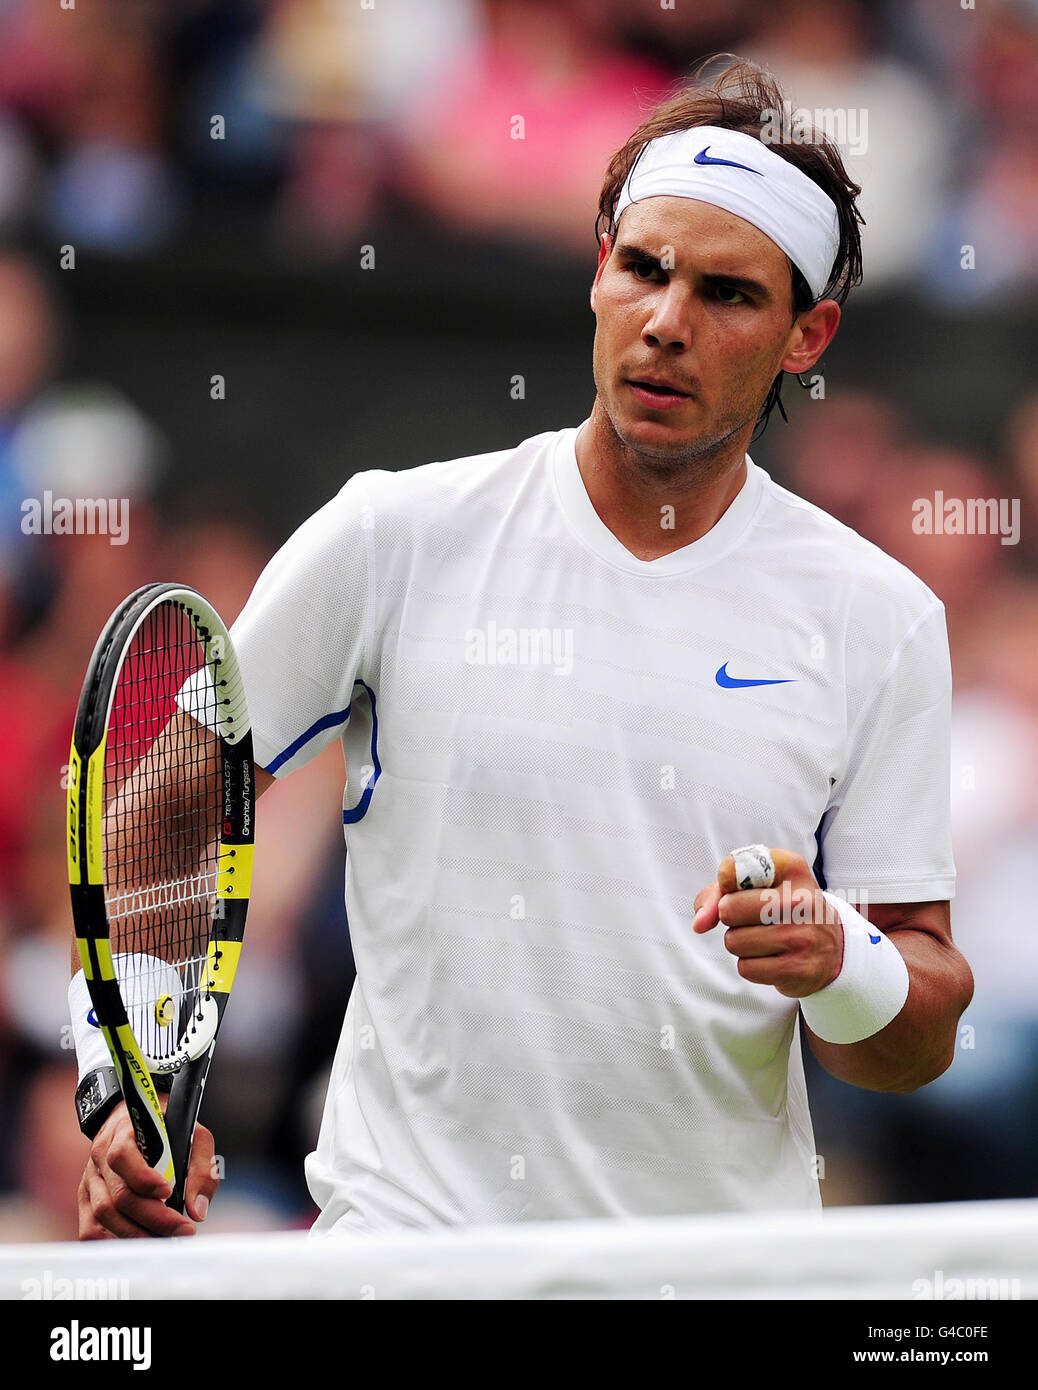 Spain's Rafael Nadal celebrates against USA's Michael Russell during the 2011 Wimbledon Championships at the all England Lawn Tennis and Croquet Club, Wimbledon. Stock Photo